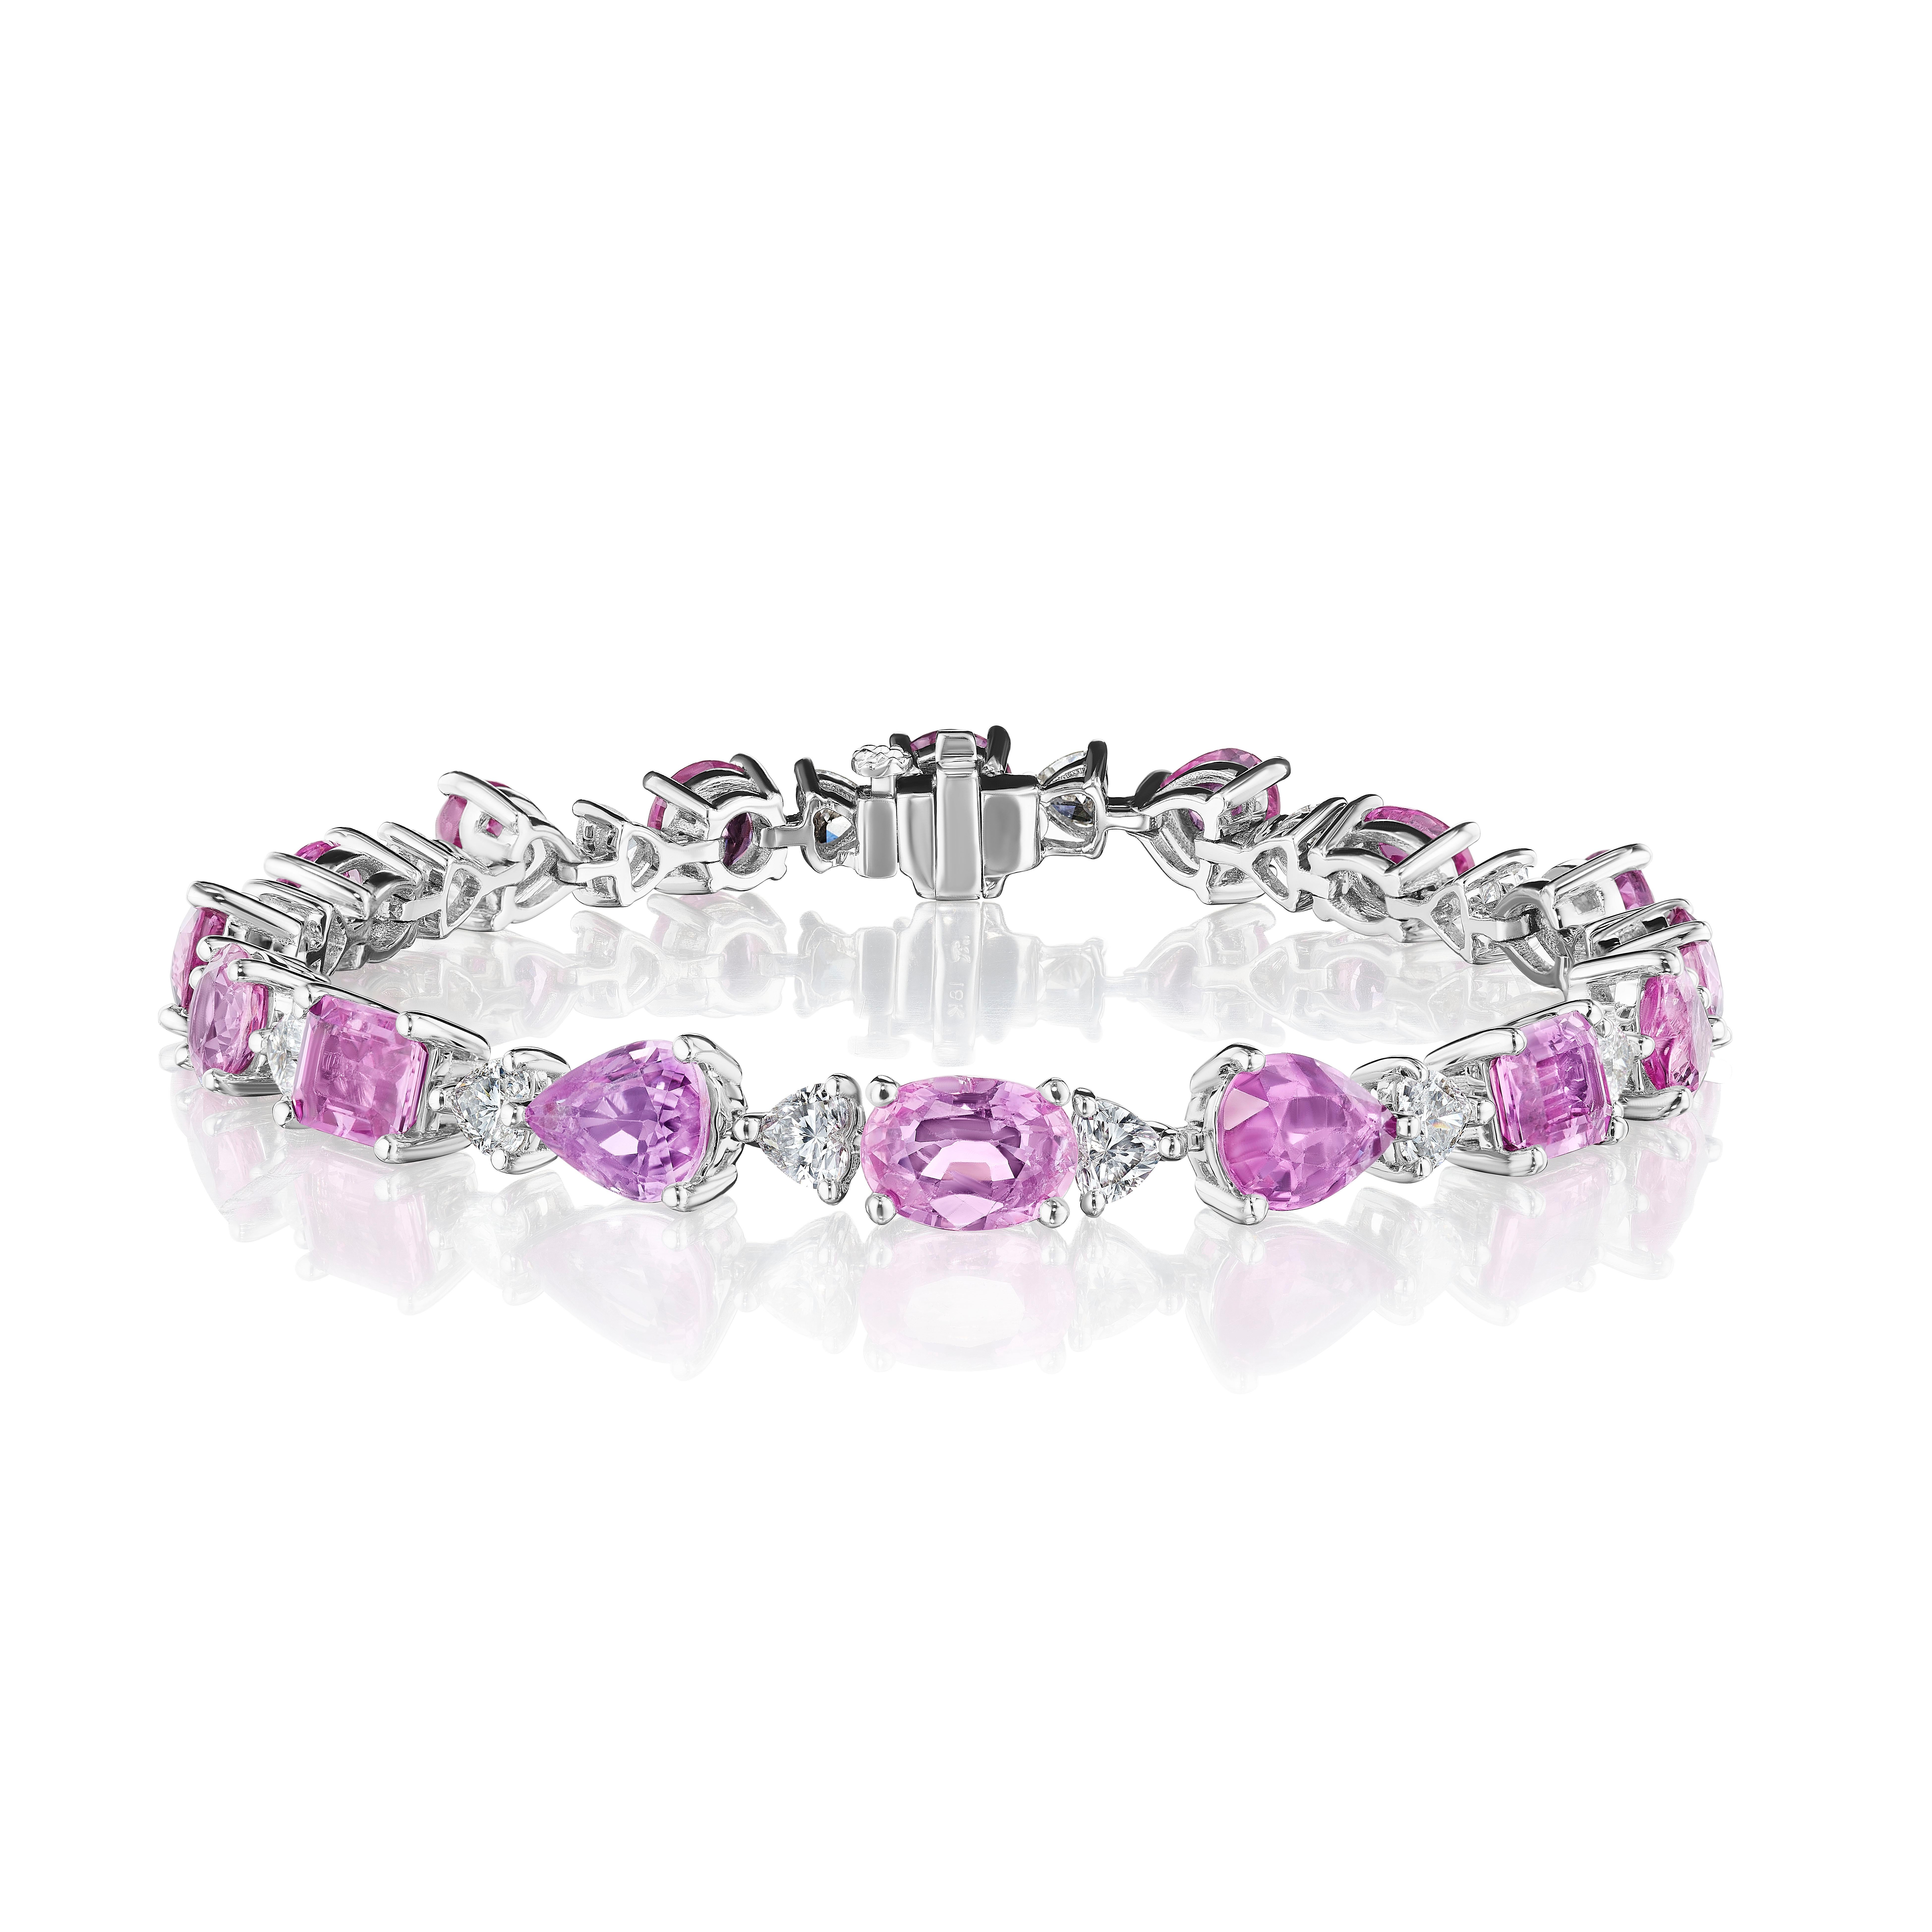 •	18KT White Gold
•	19.07 Carats
•	7” Long

•	Number of Pink Sapphires: 16
•	Carat Weight: 16.03ctw
•	Shapes: Round, Heart, Oval, Pear, Emerald Cut

•	Number of Heart Shape Diamonds: 16
•	Carat Weight: 3.04ctw

•	A beautiful mix of round, heart